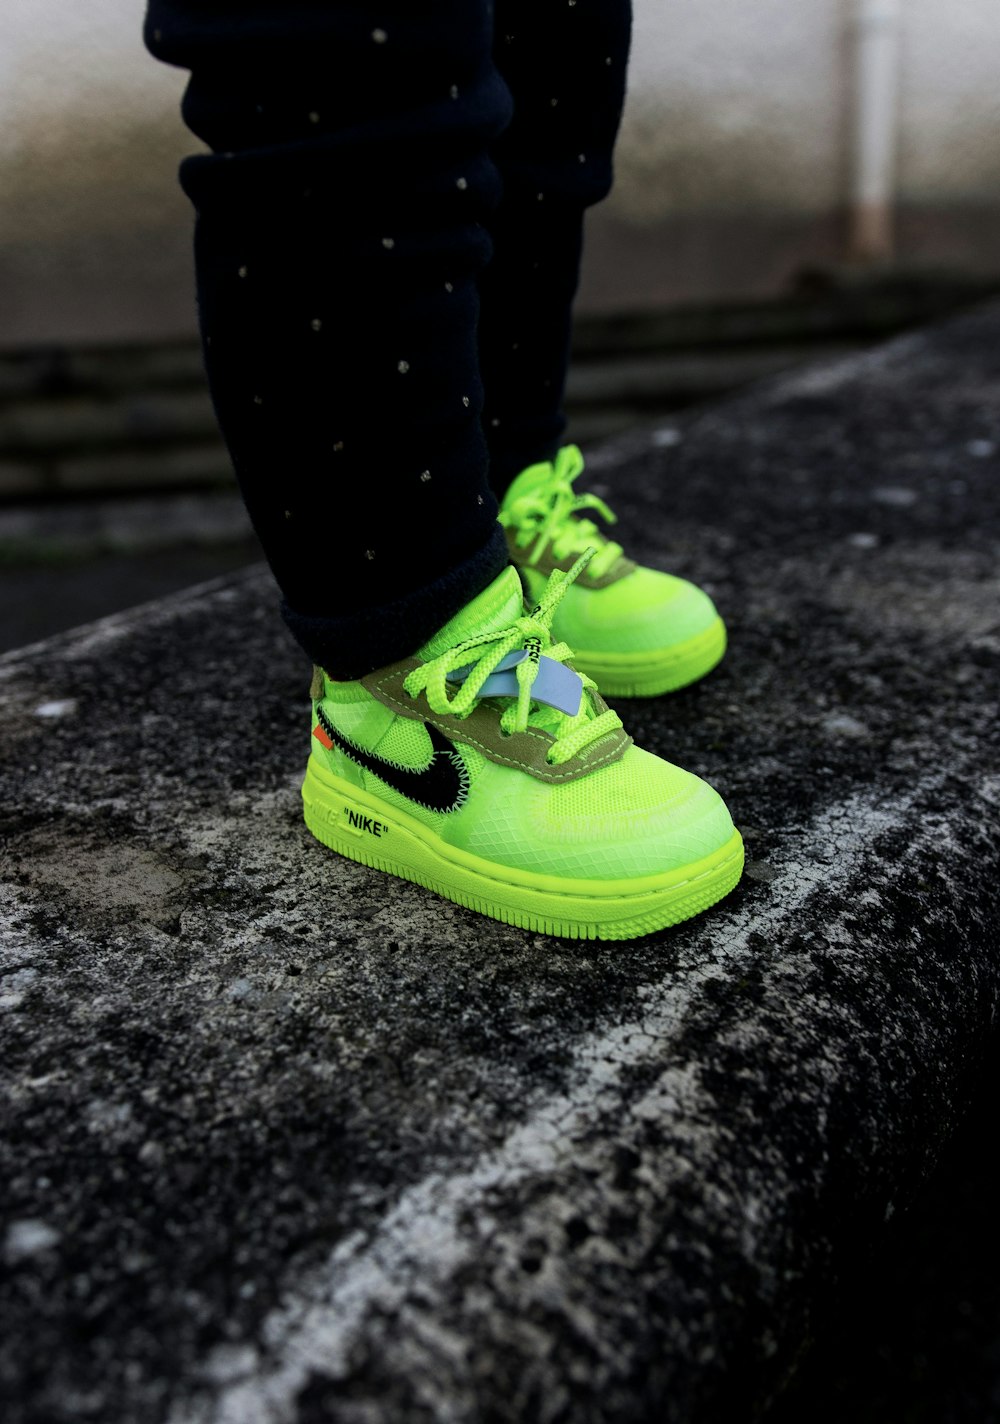 boy in green-and-black Nile shoes